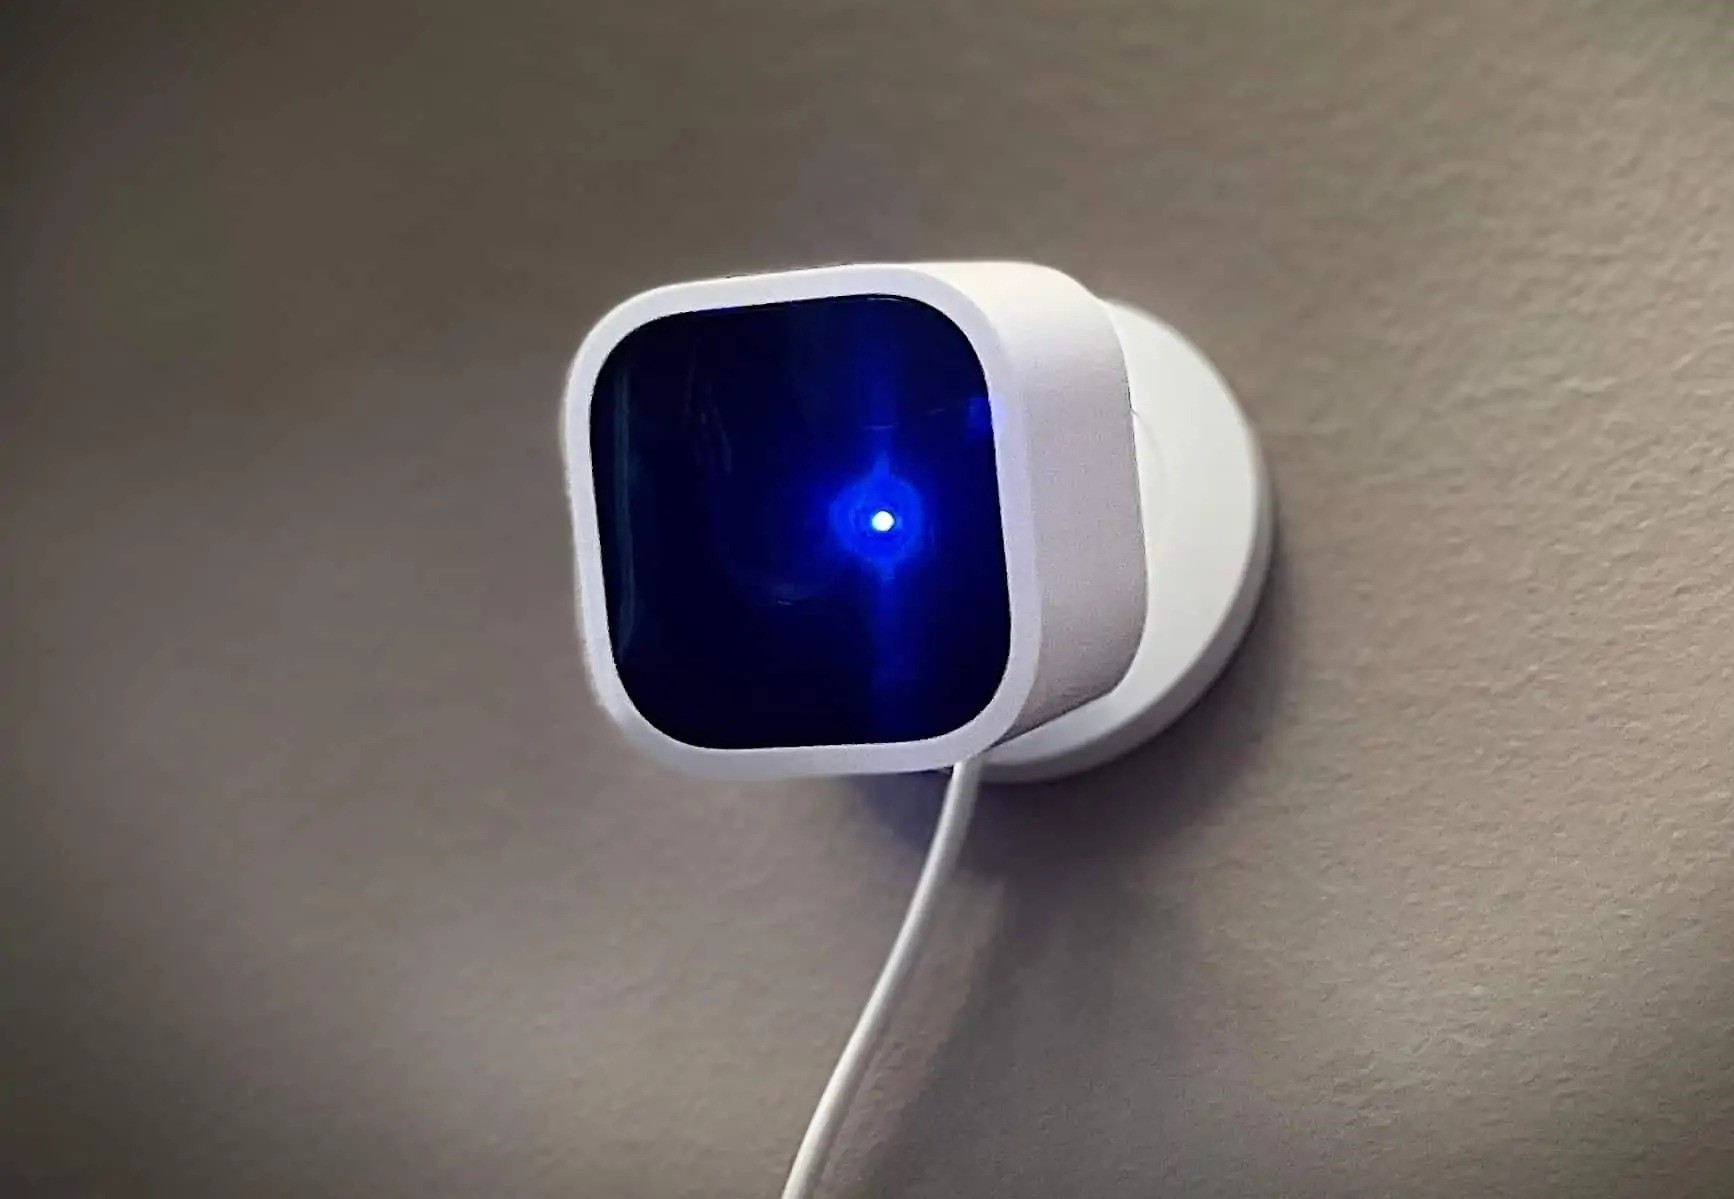 Blink Camera Indicators: The Meaning Of A Blue Light